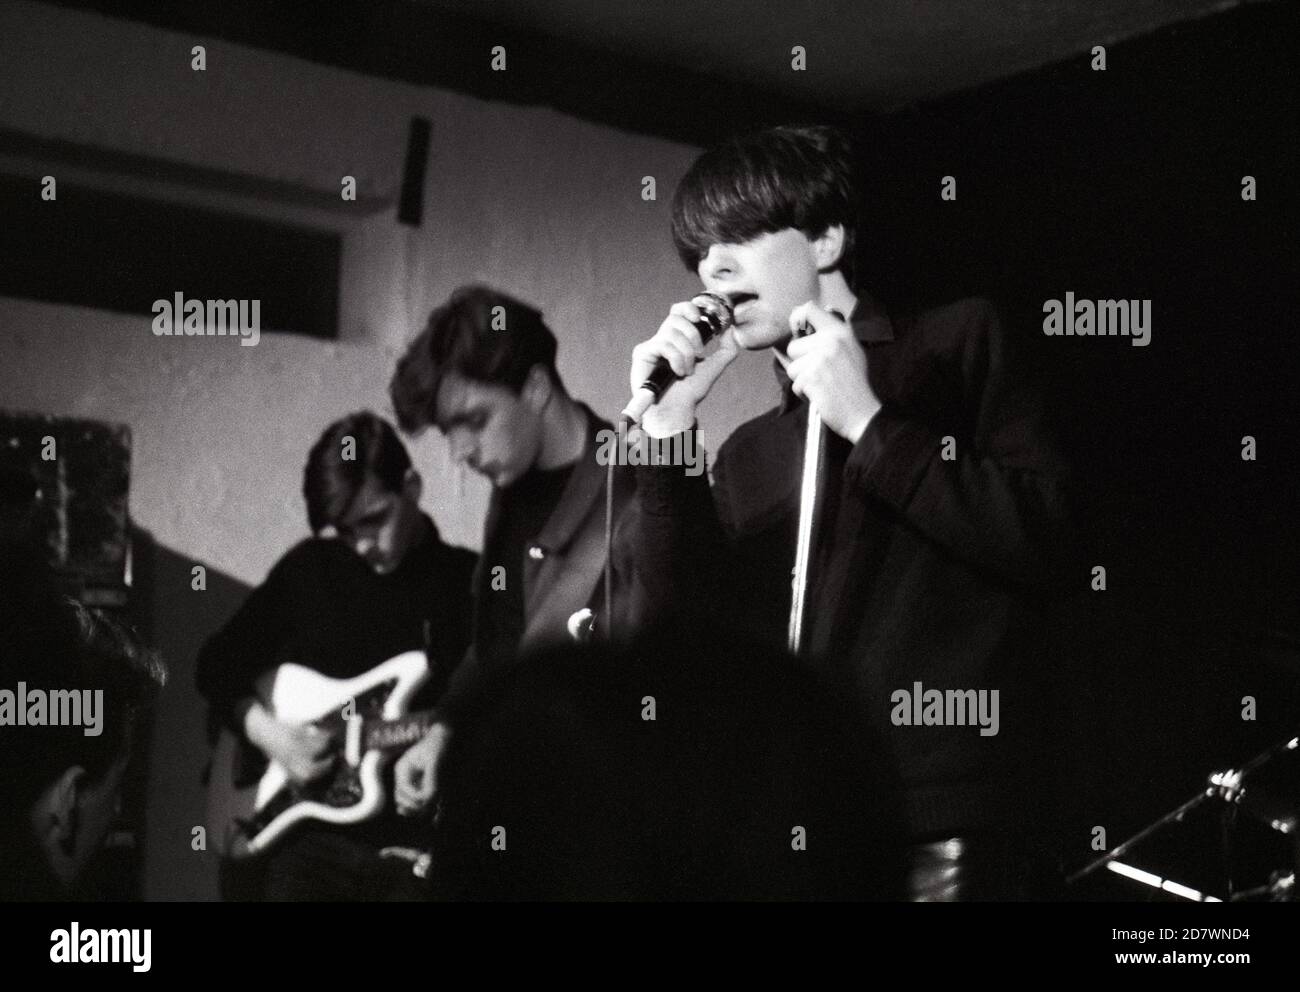 Bobby Gillespie, Robert Young and Paul Harte of Primal Scream performing at the Wellhead Inn, Wendover, England, 20th September 1986. Stock Photo